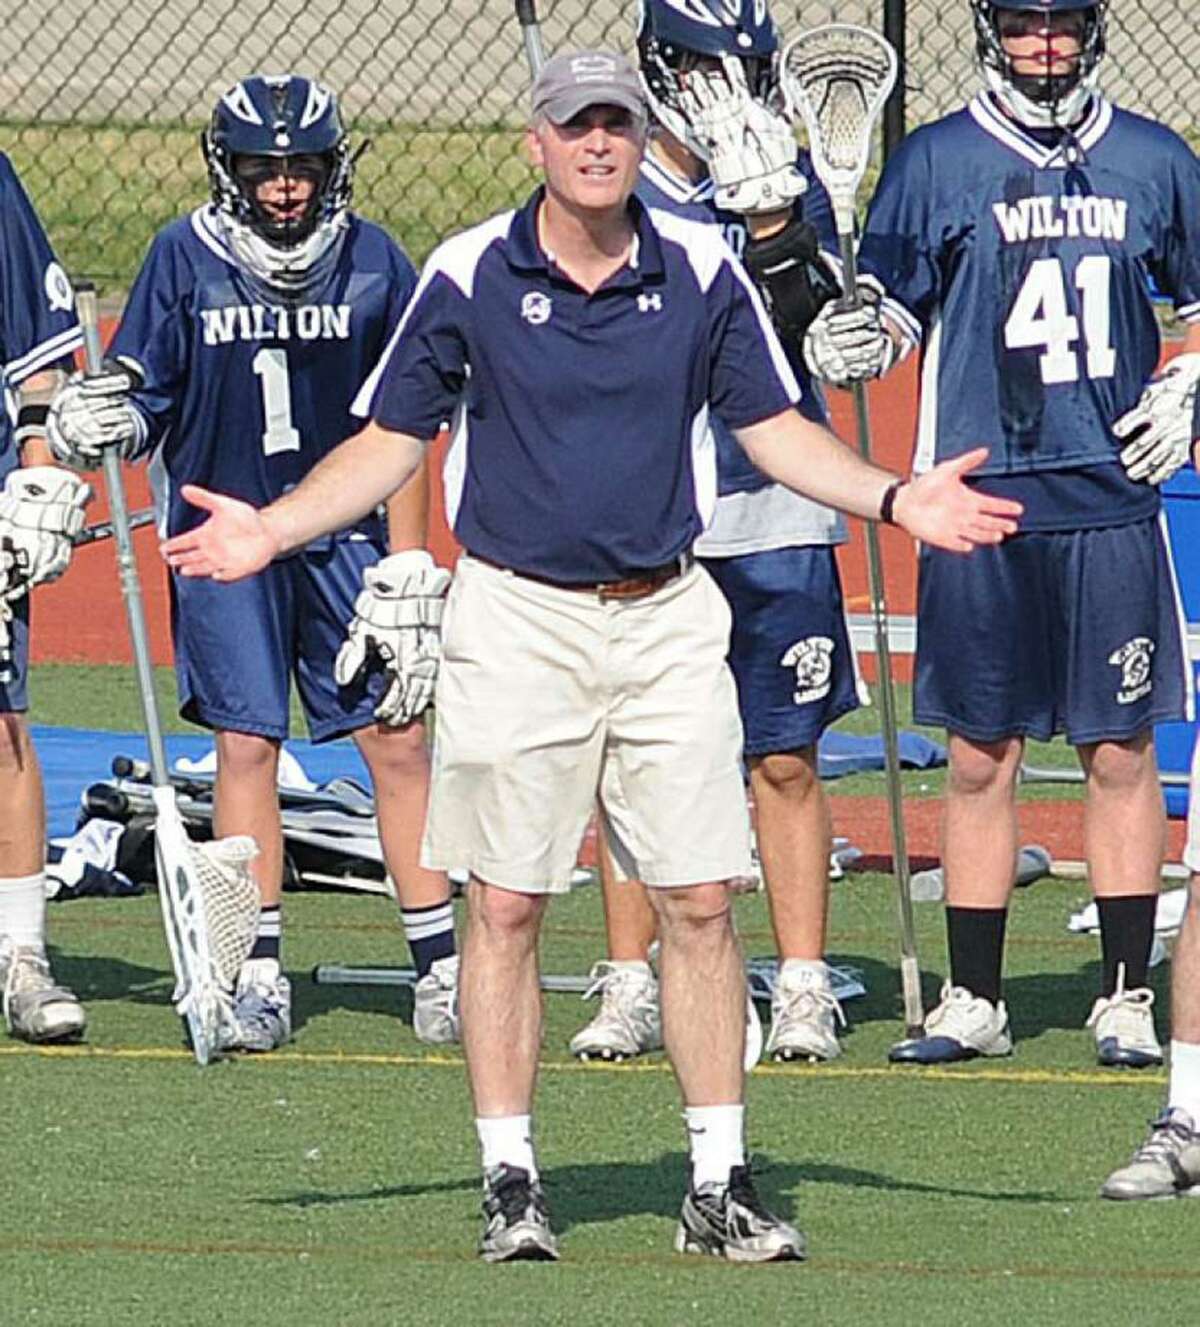 Wilton boys lacrosse coach Steve Pearsall reacts during a game earlier in his coaching career. After 10 years as an assistant with the Warriors, Pearsall was named head coach this week.